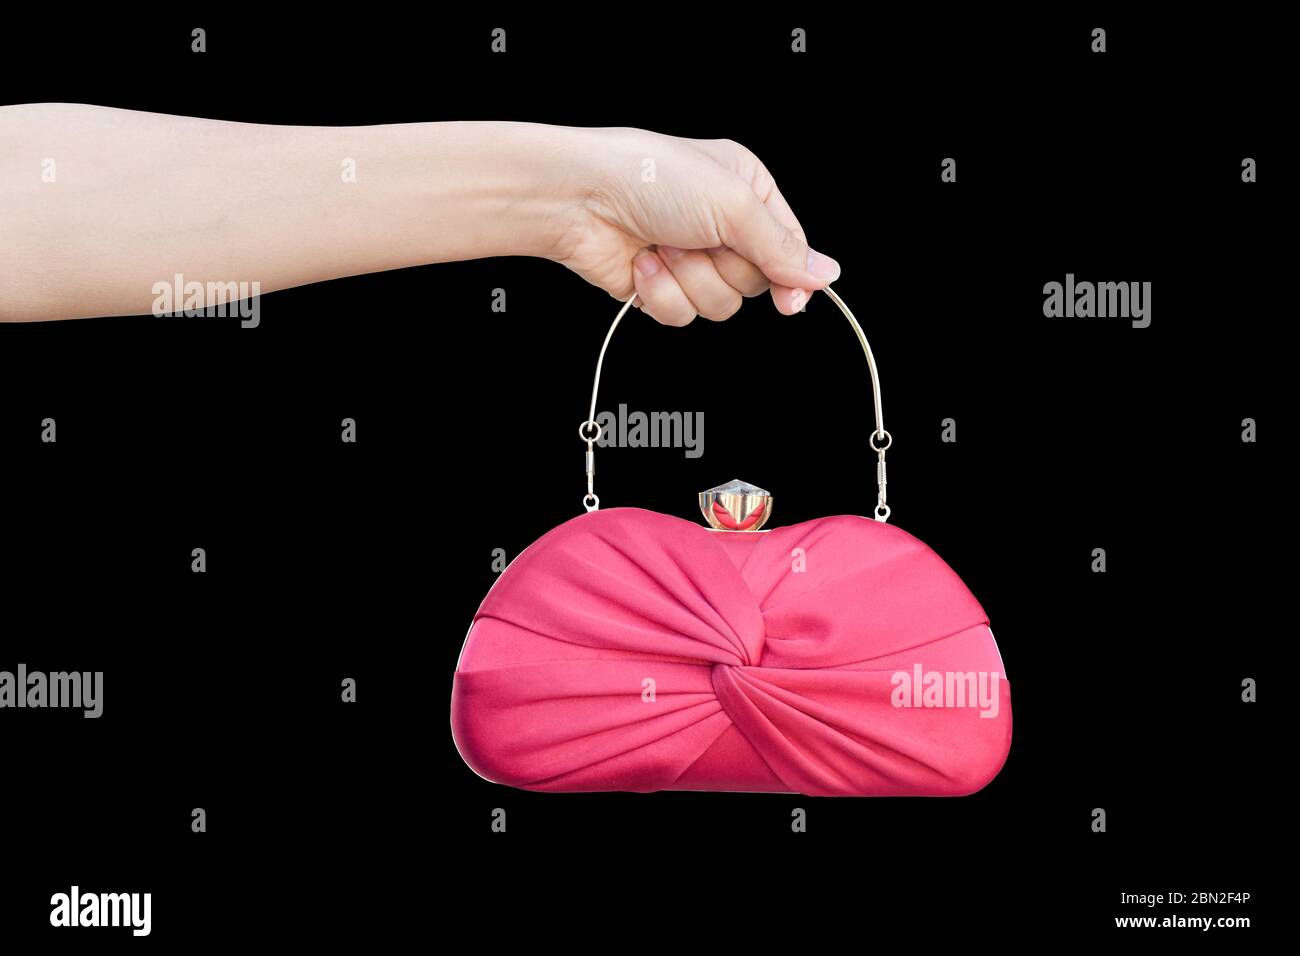 hand holding red luxury clutch bag isolated on black background. Stock Photo